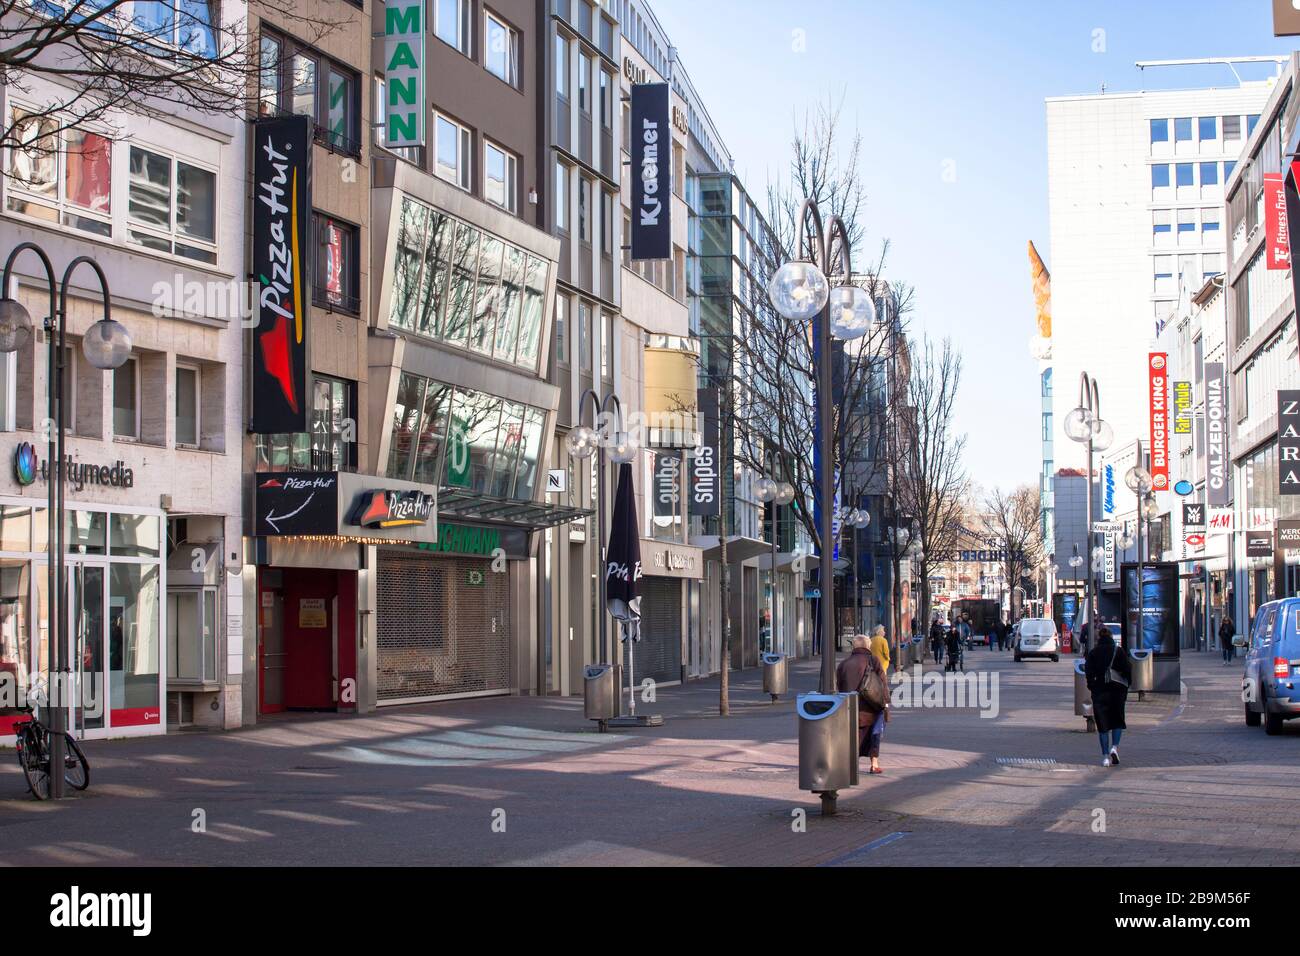 Coronavirus / Covid 19 outbreak, March 24th. 2020. Only few people on shopping street Schildergasse, usually visited by thousands of people, Cologne, Stock Photo